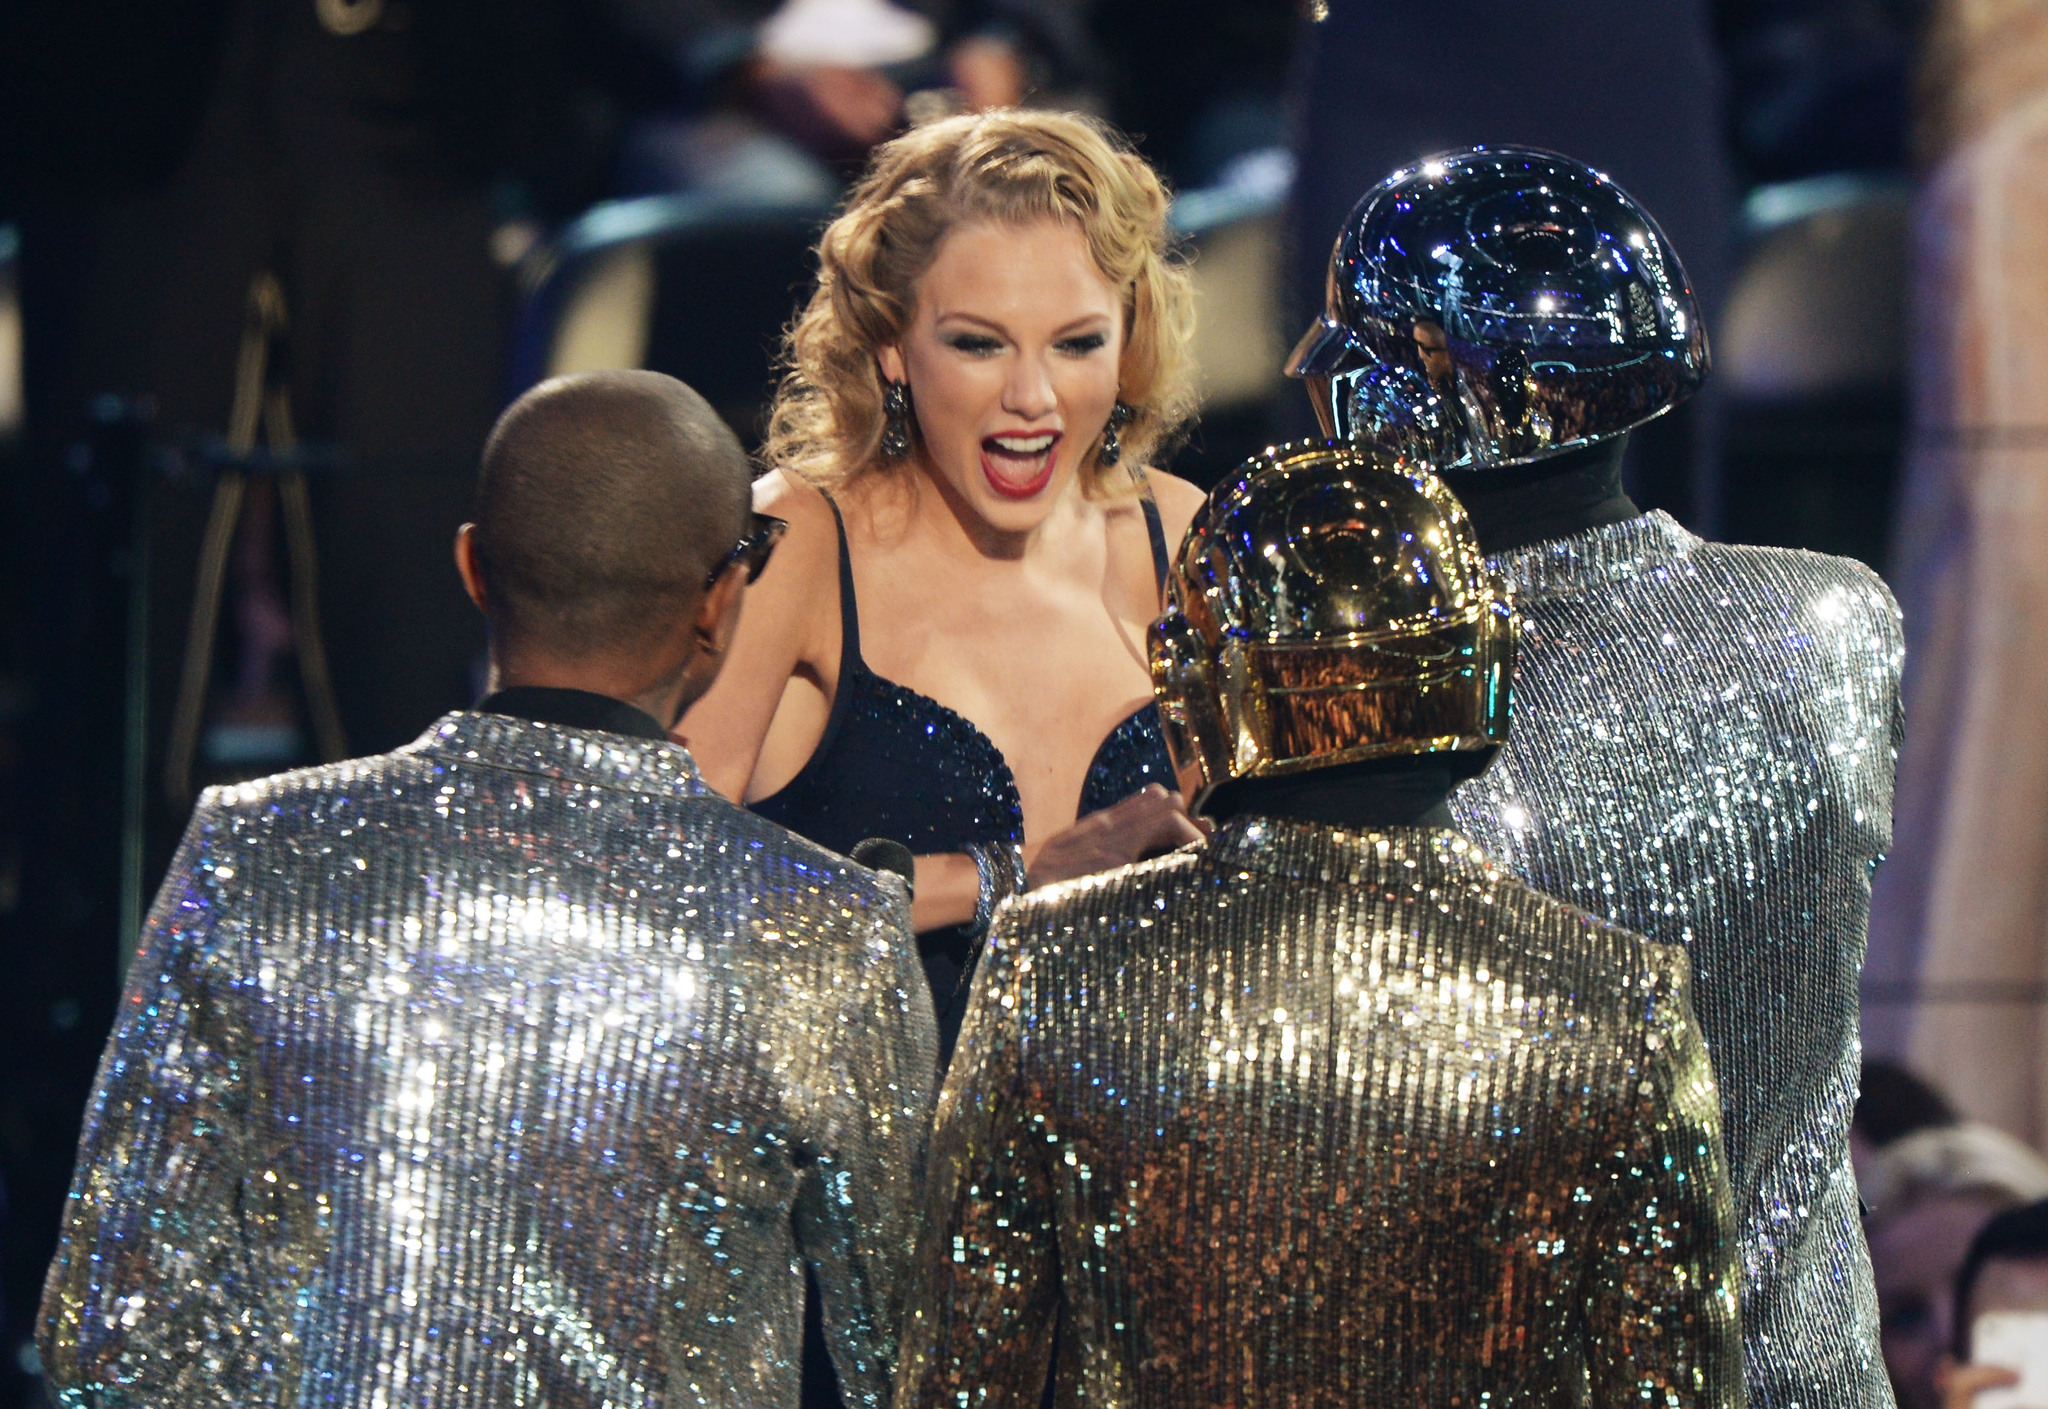 Nile Rodgers, Pharrell Williams, Daft Punk and Taylor Swift at event of 2013 MTV Video Music Awards (2013)